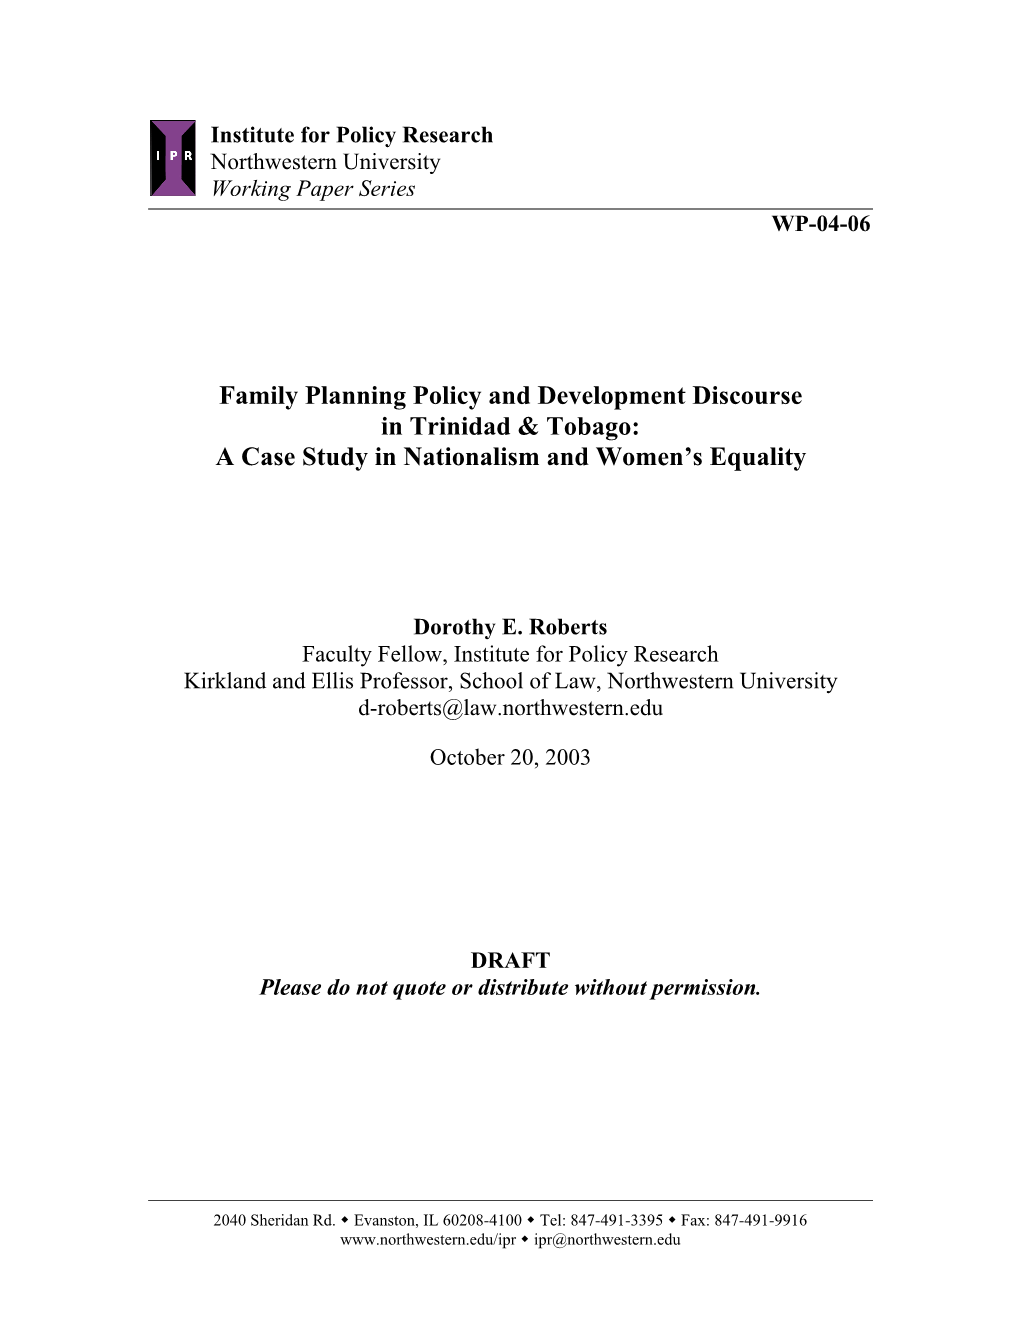 Family Planning Policy and Development Discourse in Trinidad & Tobago: a Case Study in Nationalism and Women's Equality